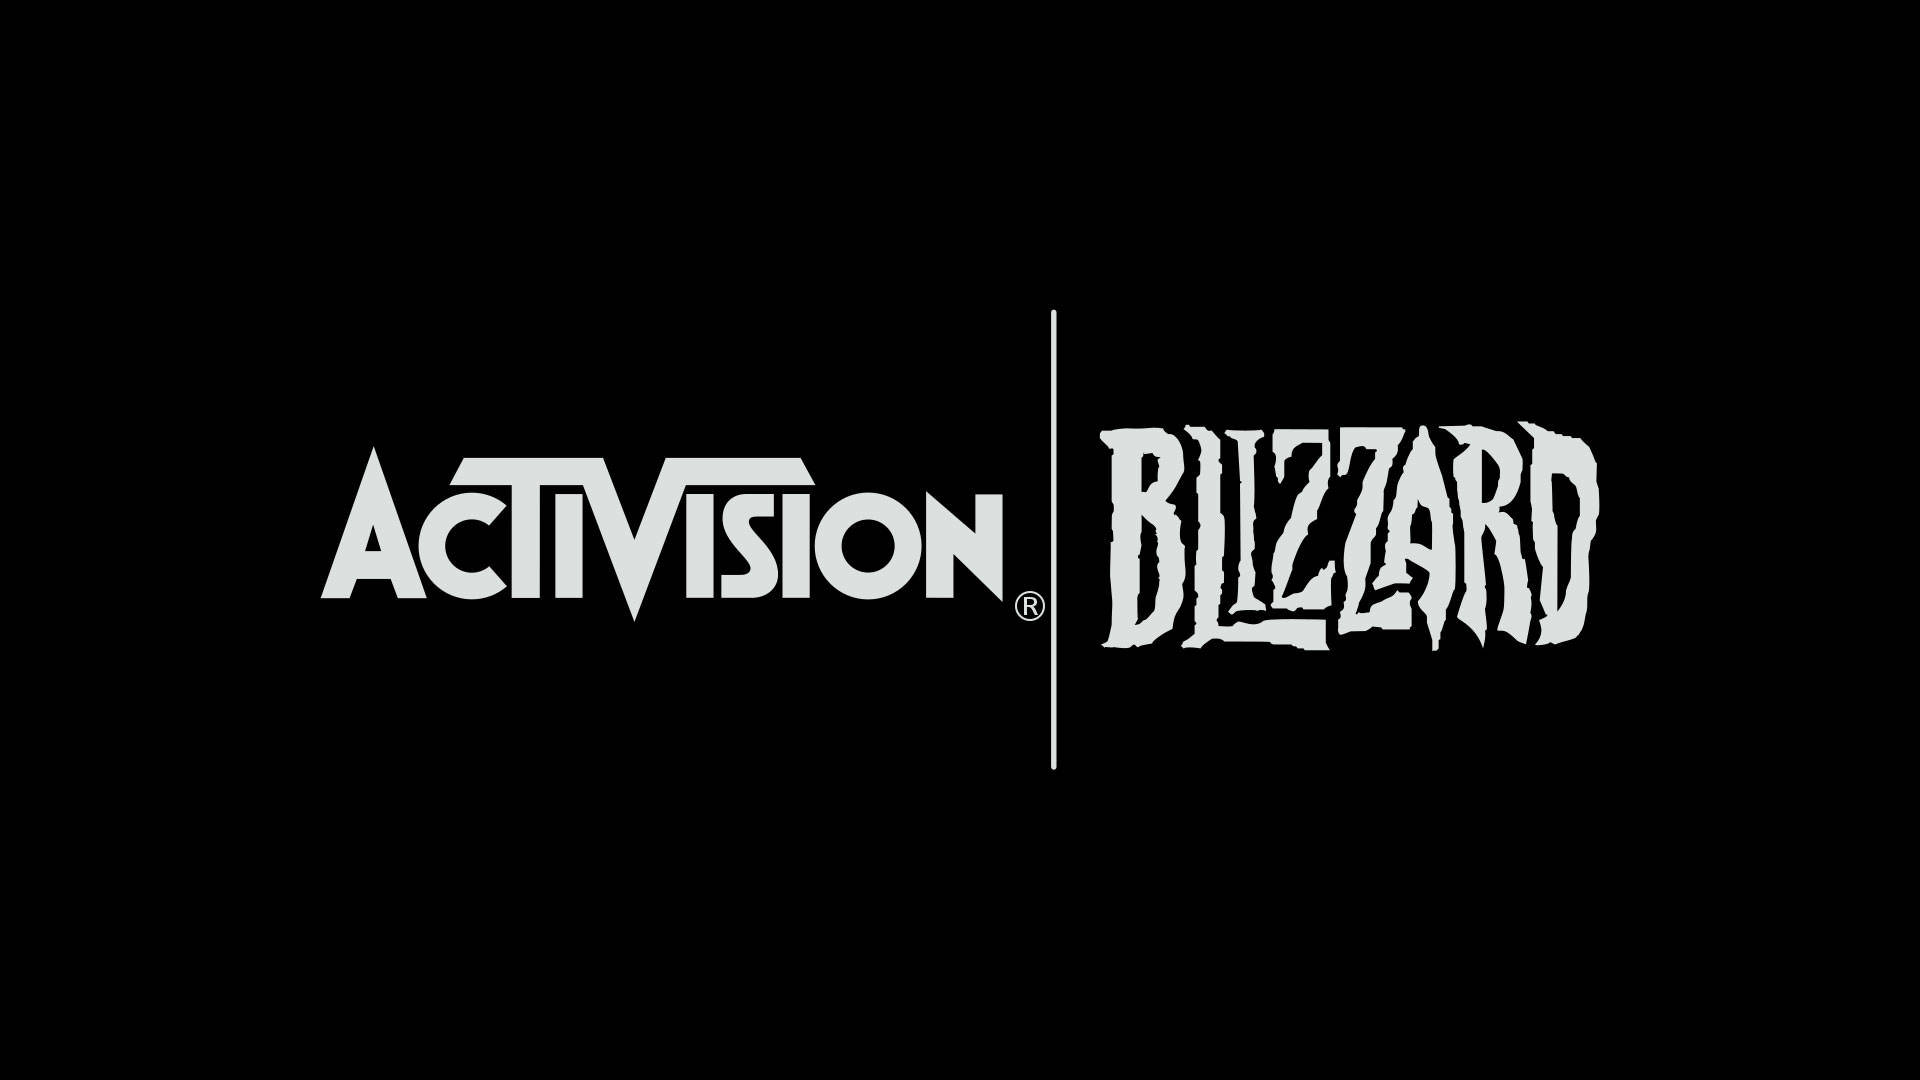 Microsoft-Activision deal moves closer as FTC’s latest block effort is denied